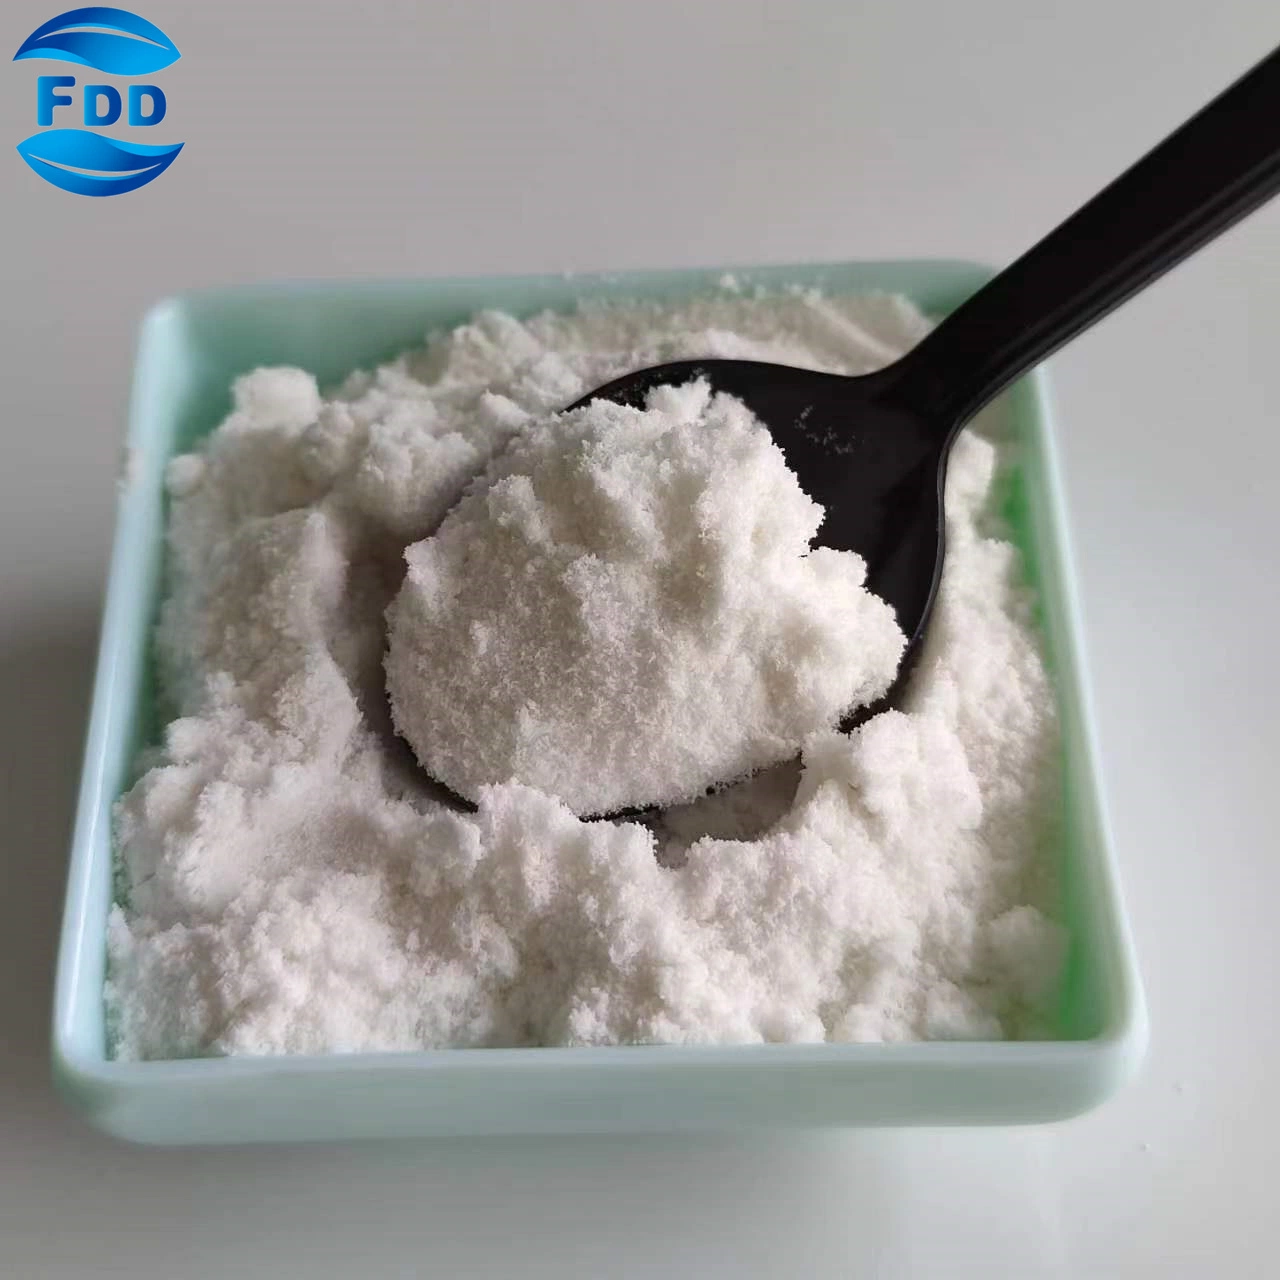 98% Calcium Formate FDD CAS 544-17-2 Price Technical Industrial Grade 98% Calcium Formate for Construction and Food Additives